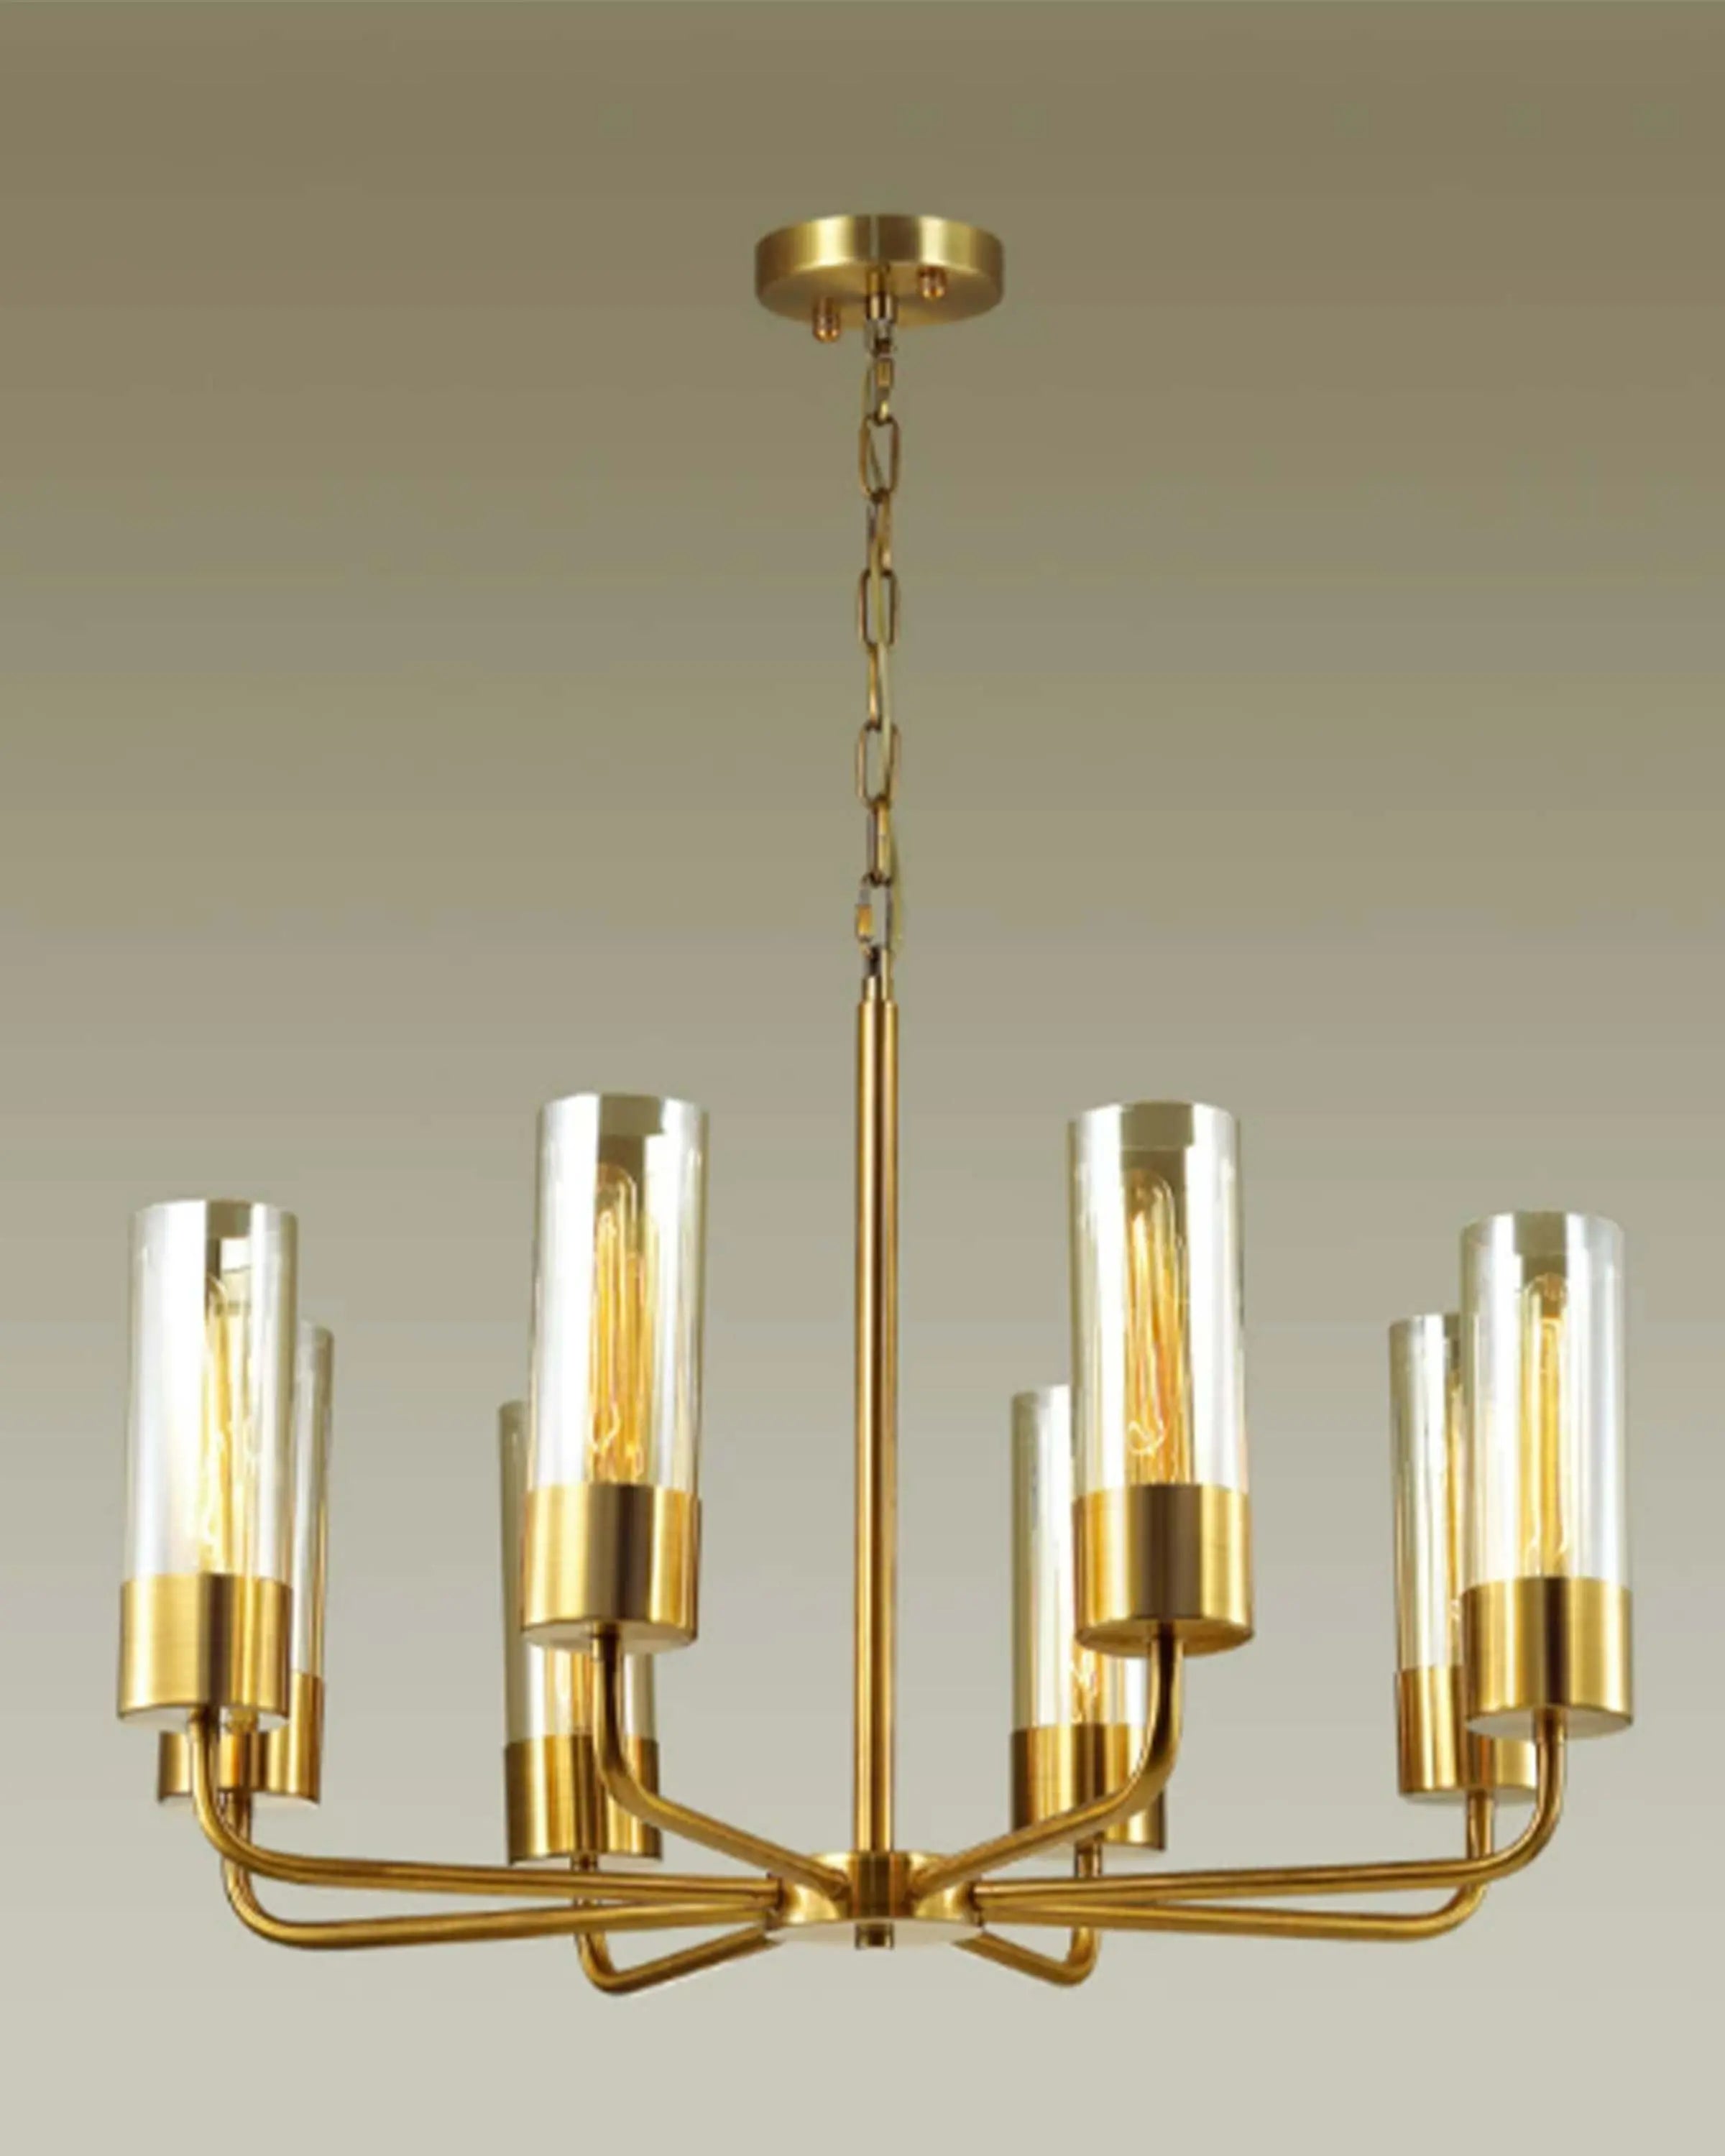 MAKALU Classic Crystal Chandelier ANGIE HOMES